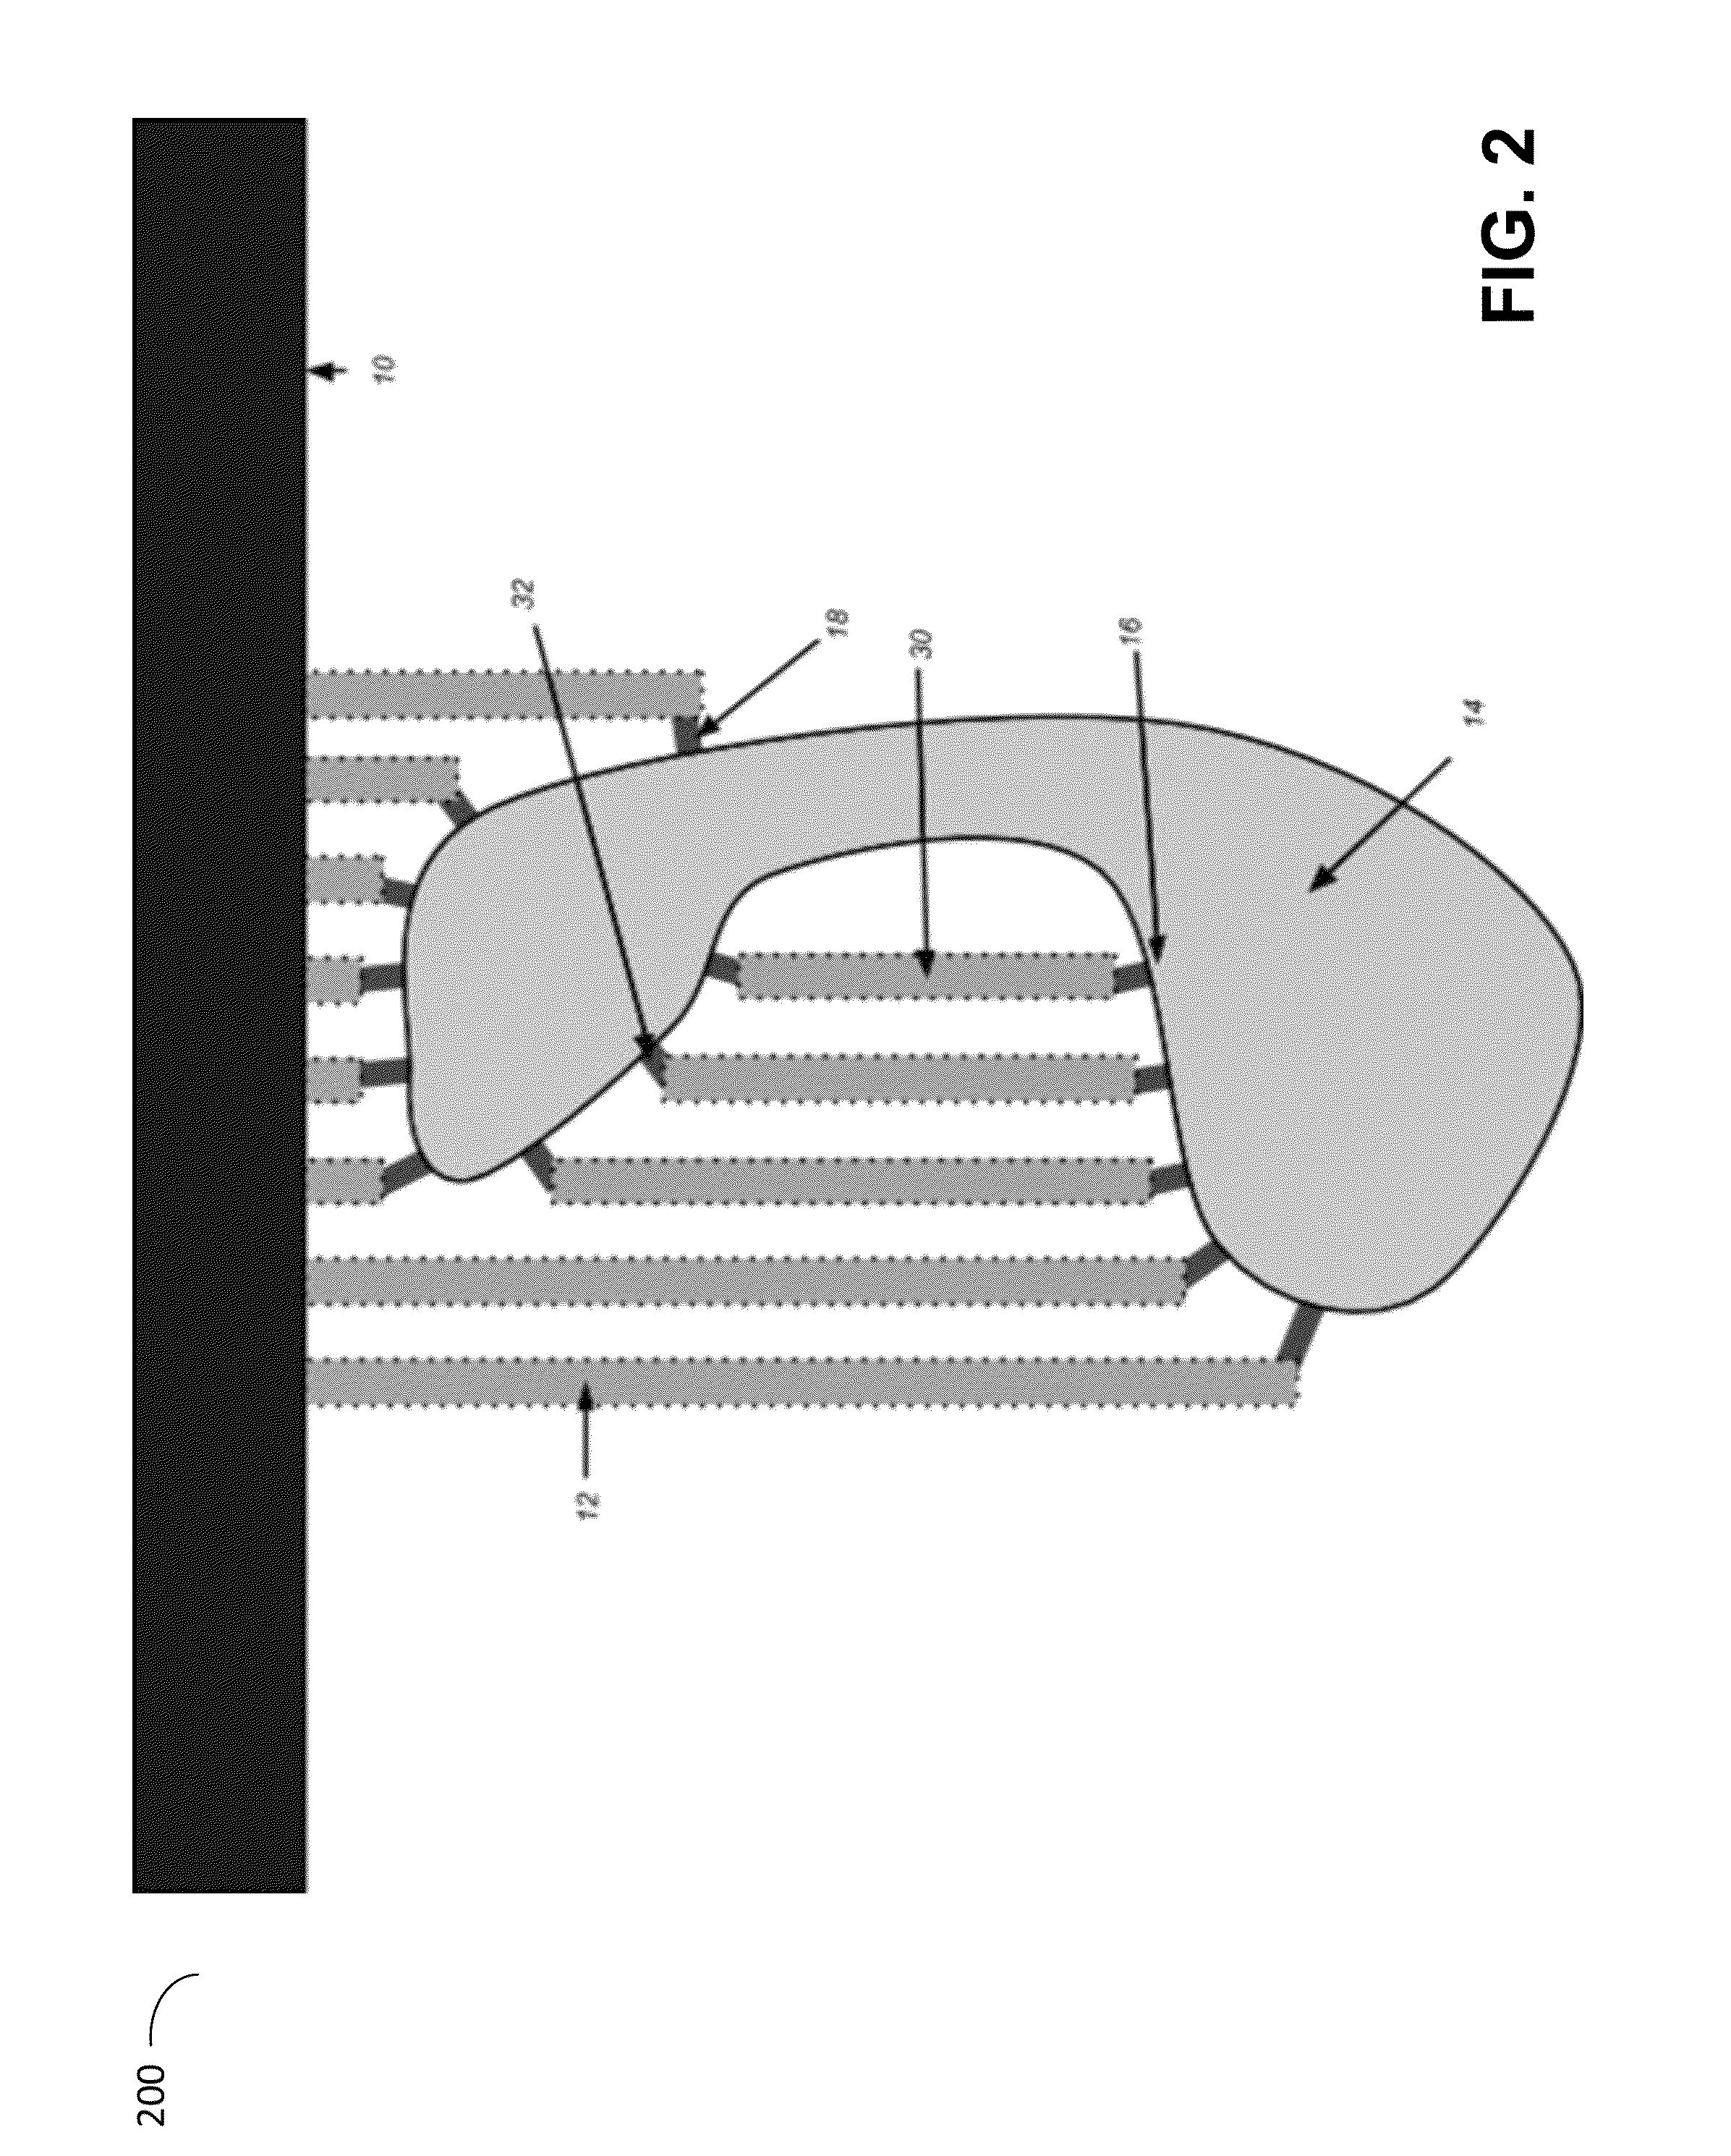 Additive fabrication support structures